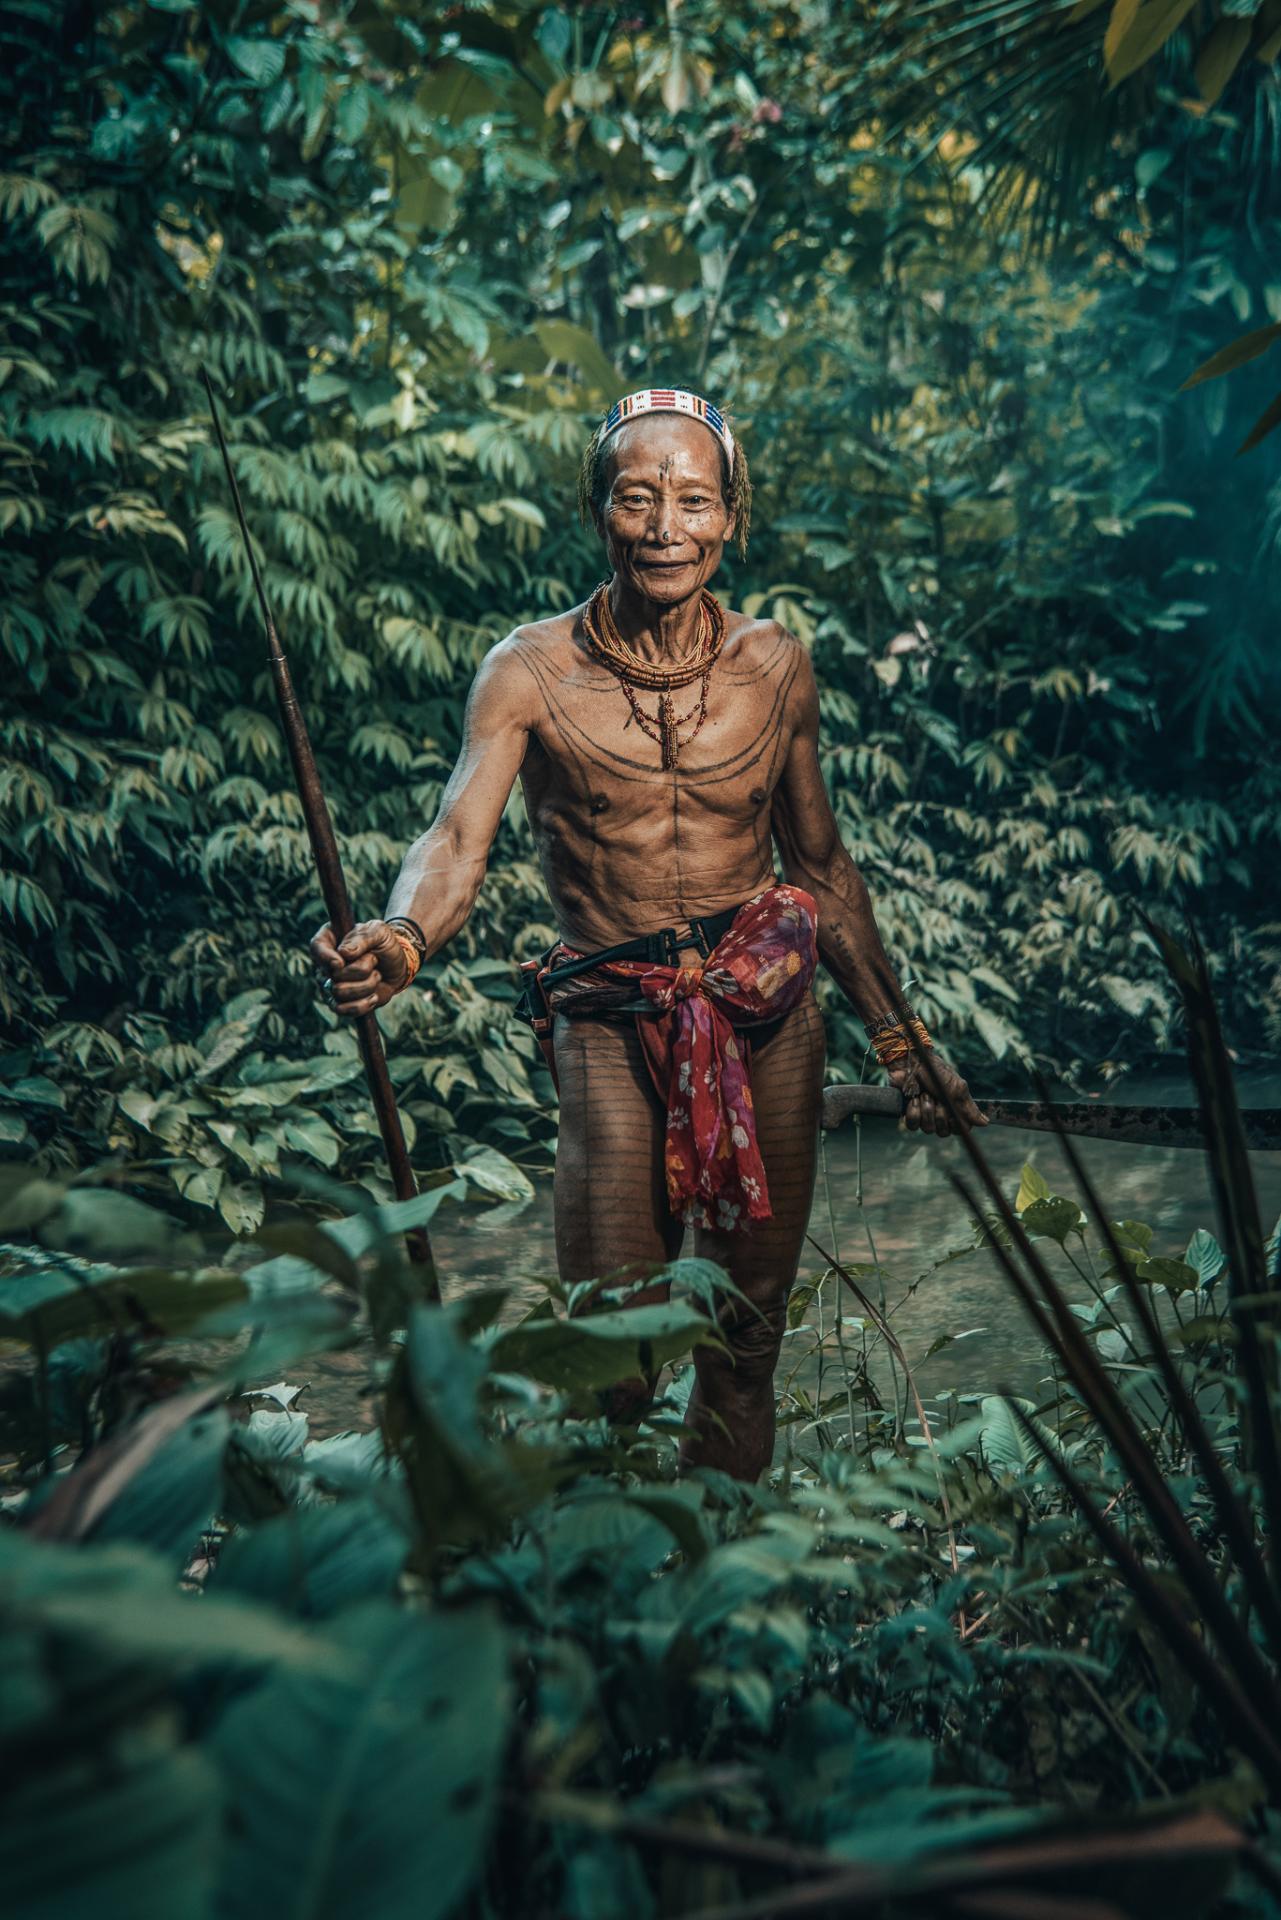 European Photography Awards Winner - Mentawei: Keepers of the forest